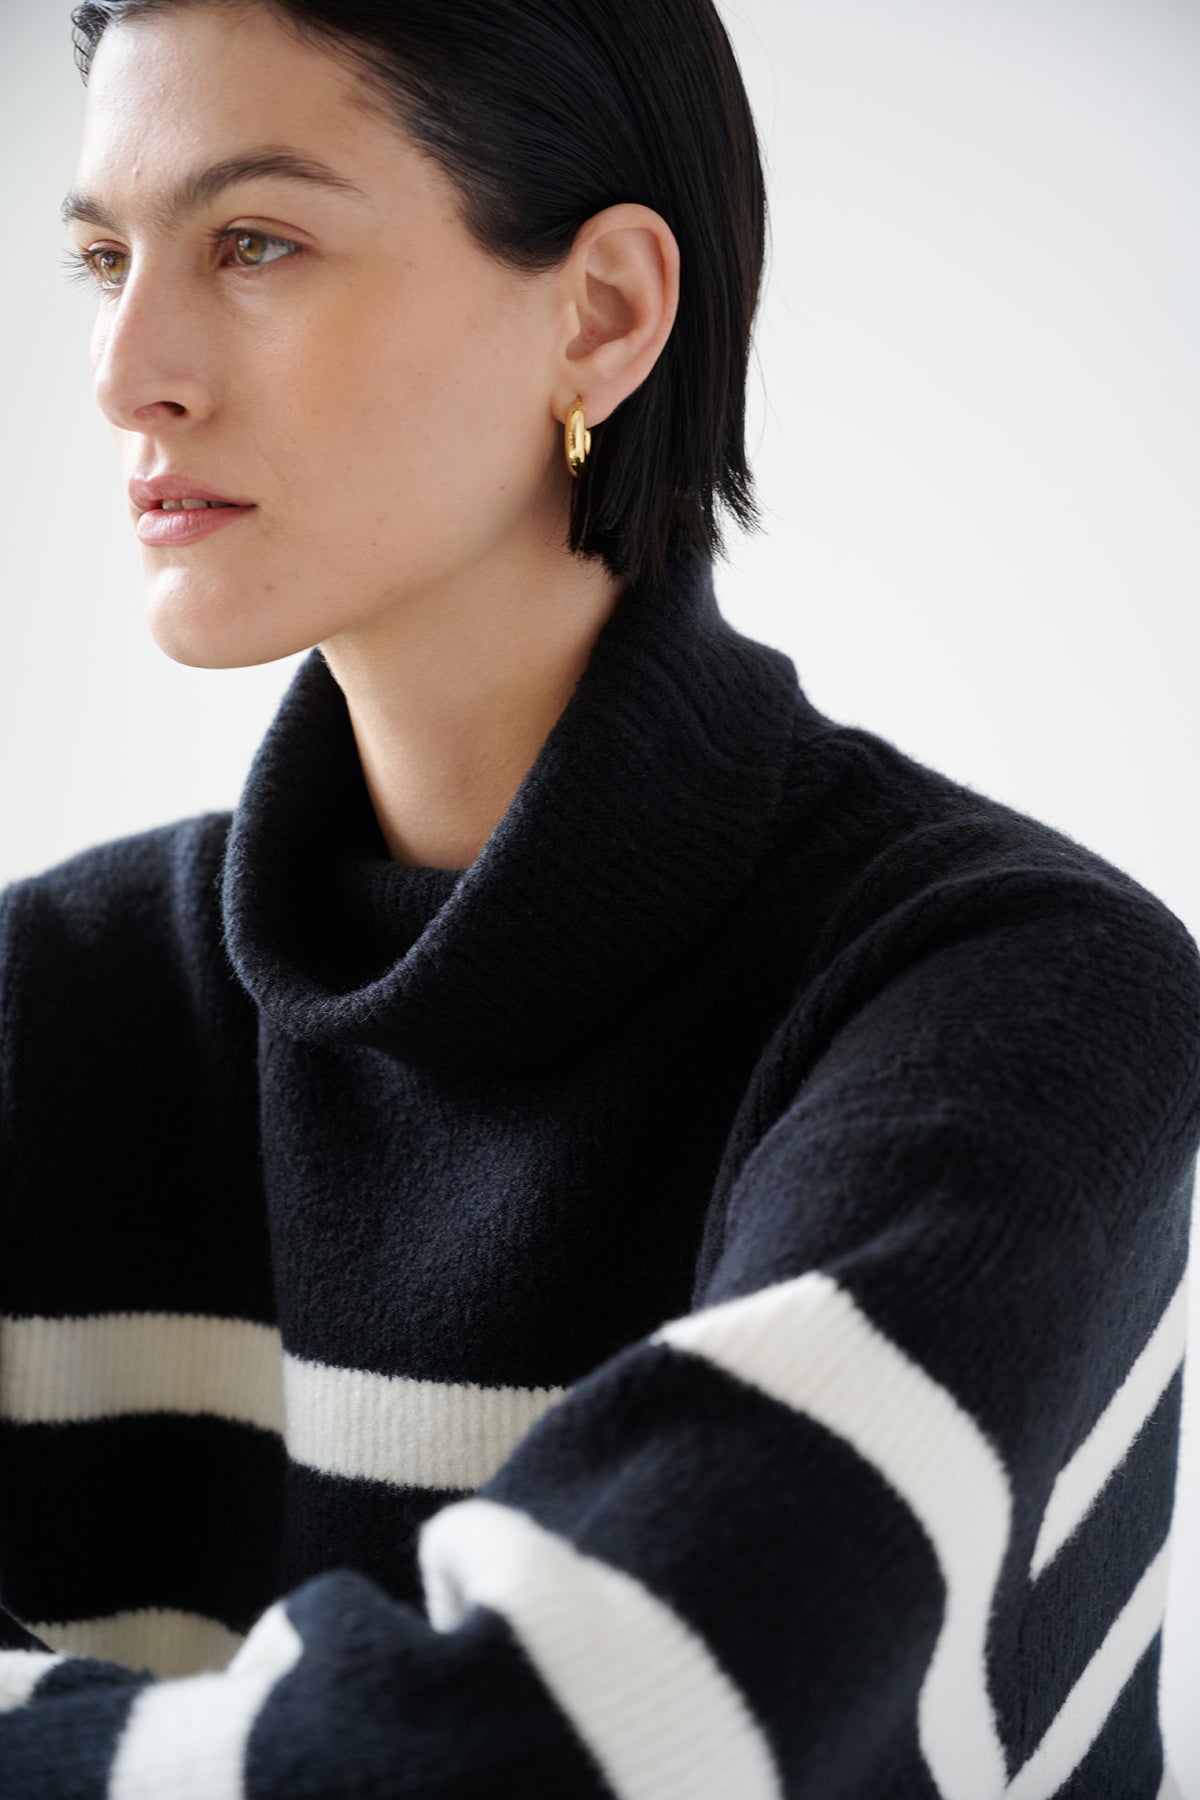   A woman wearing an oversized and cozy ENCINO SWEATER by Velvet by Jenny Graham, a wool blend turtleneck sweater. 